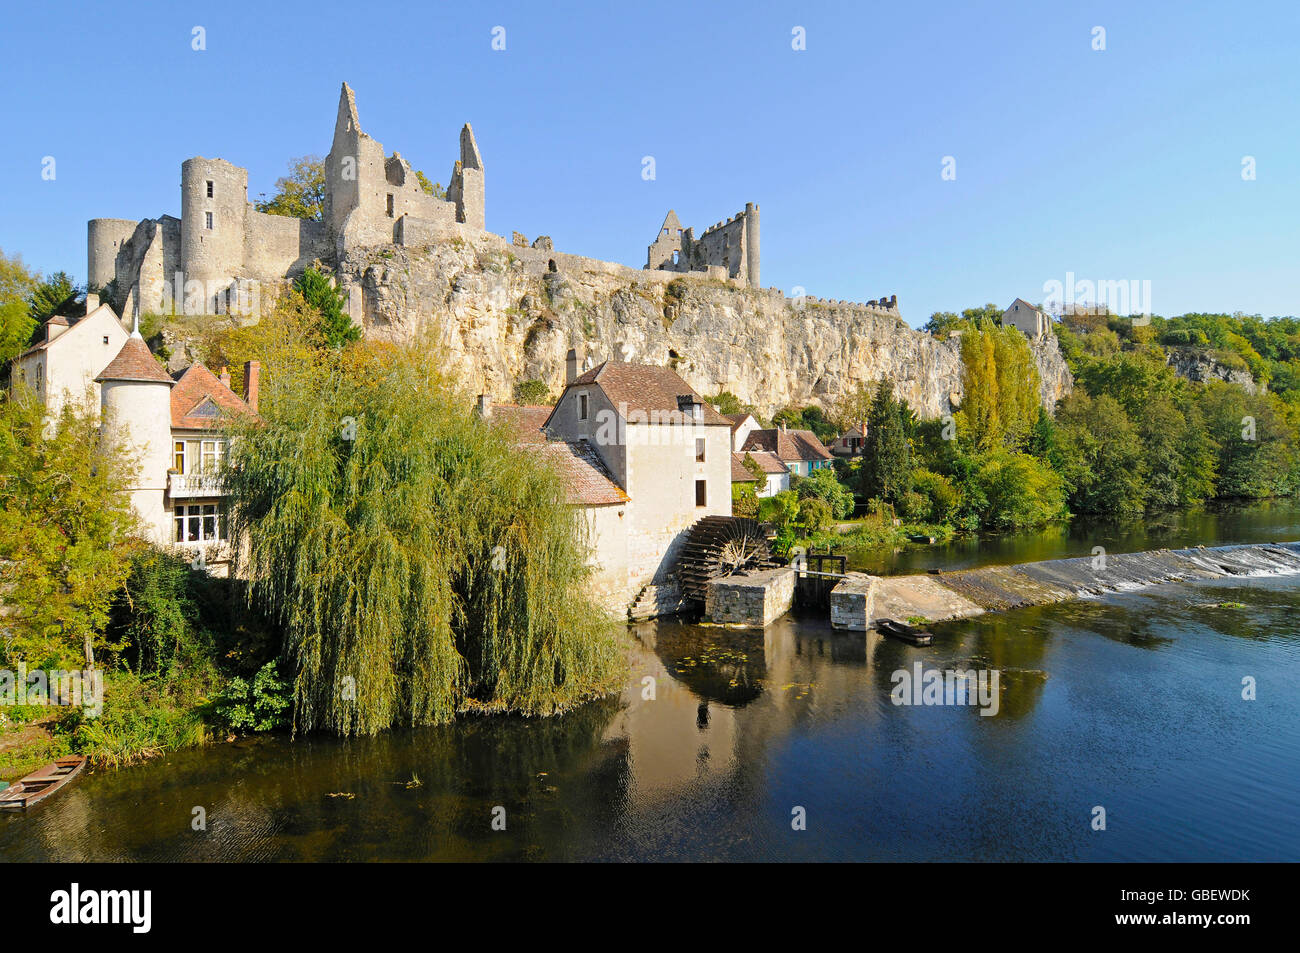 Castle, water mill, river Anglin, Angles sur l'Anglin, Poitiers, Departement Vienne, Poitou-Charentes, France Stock Photo